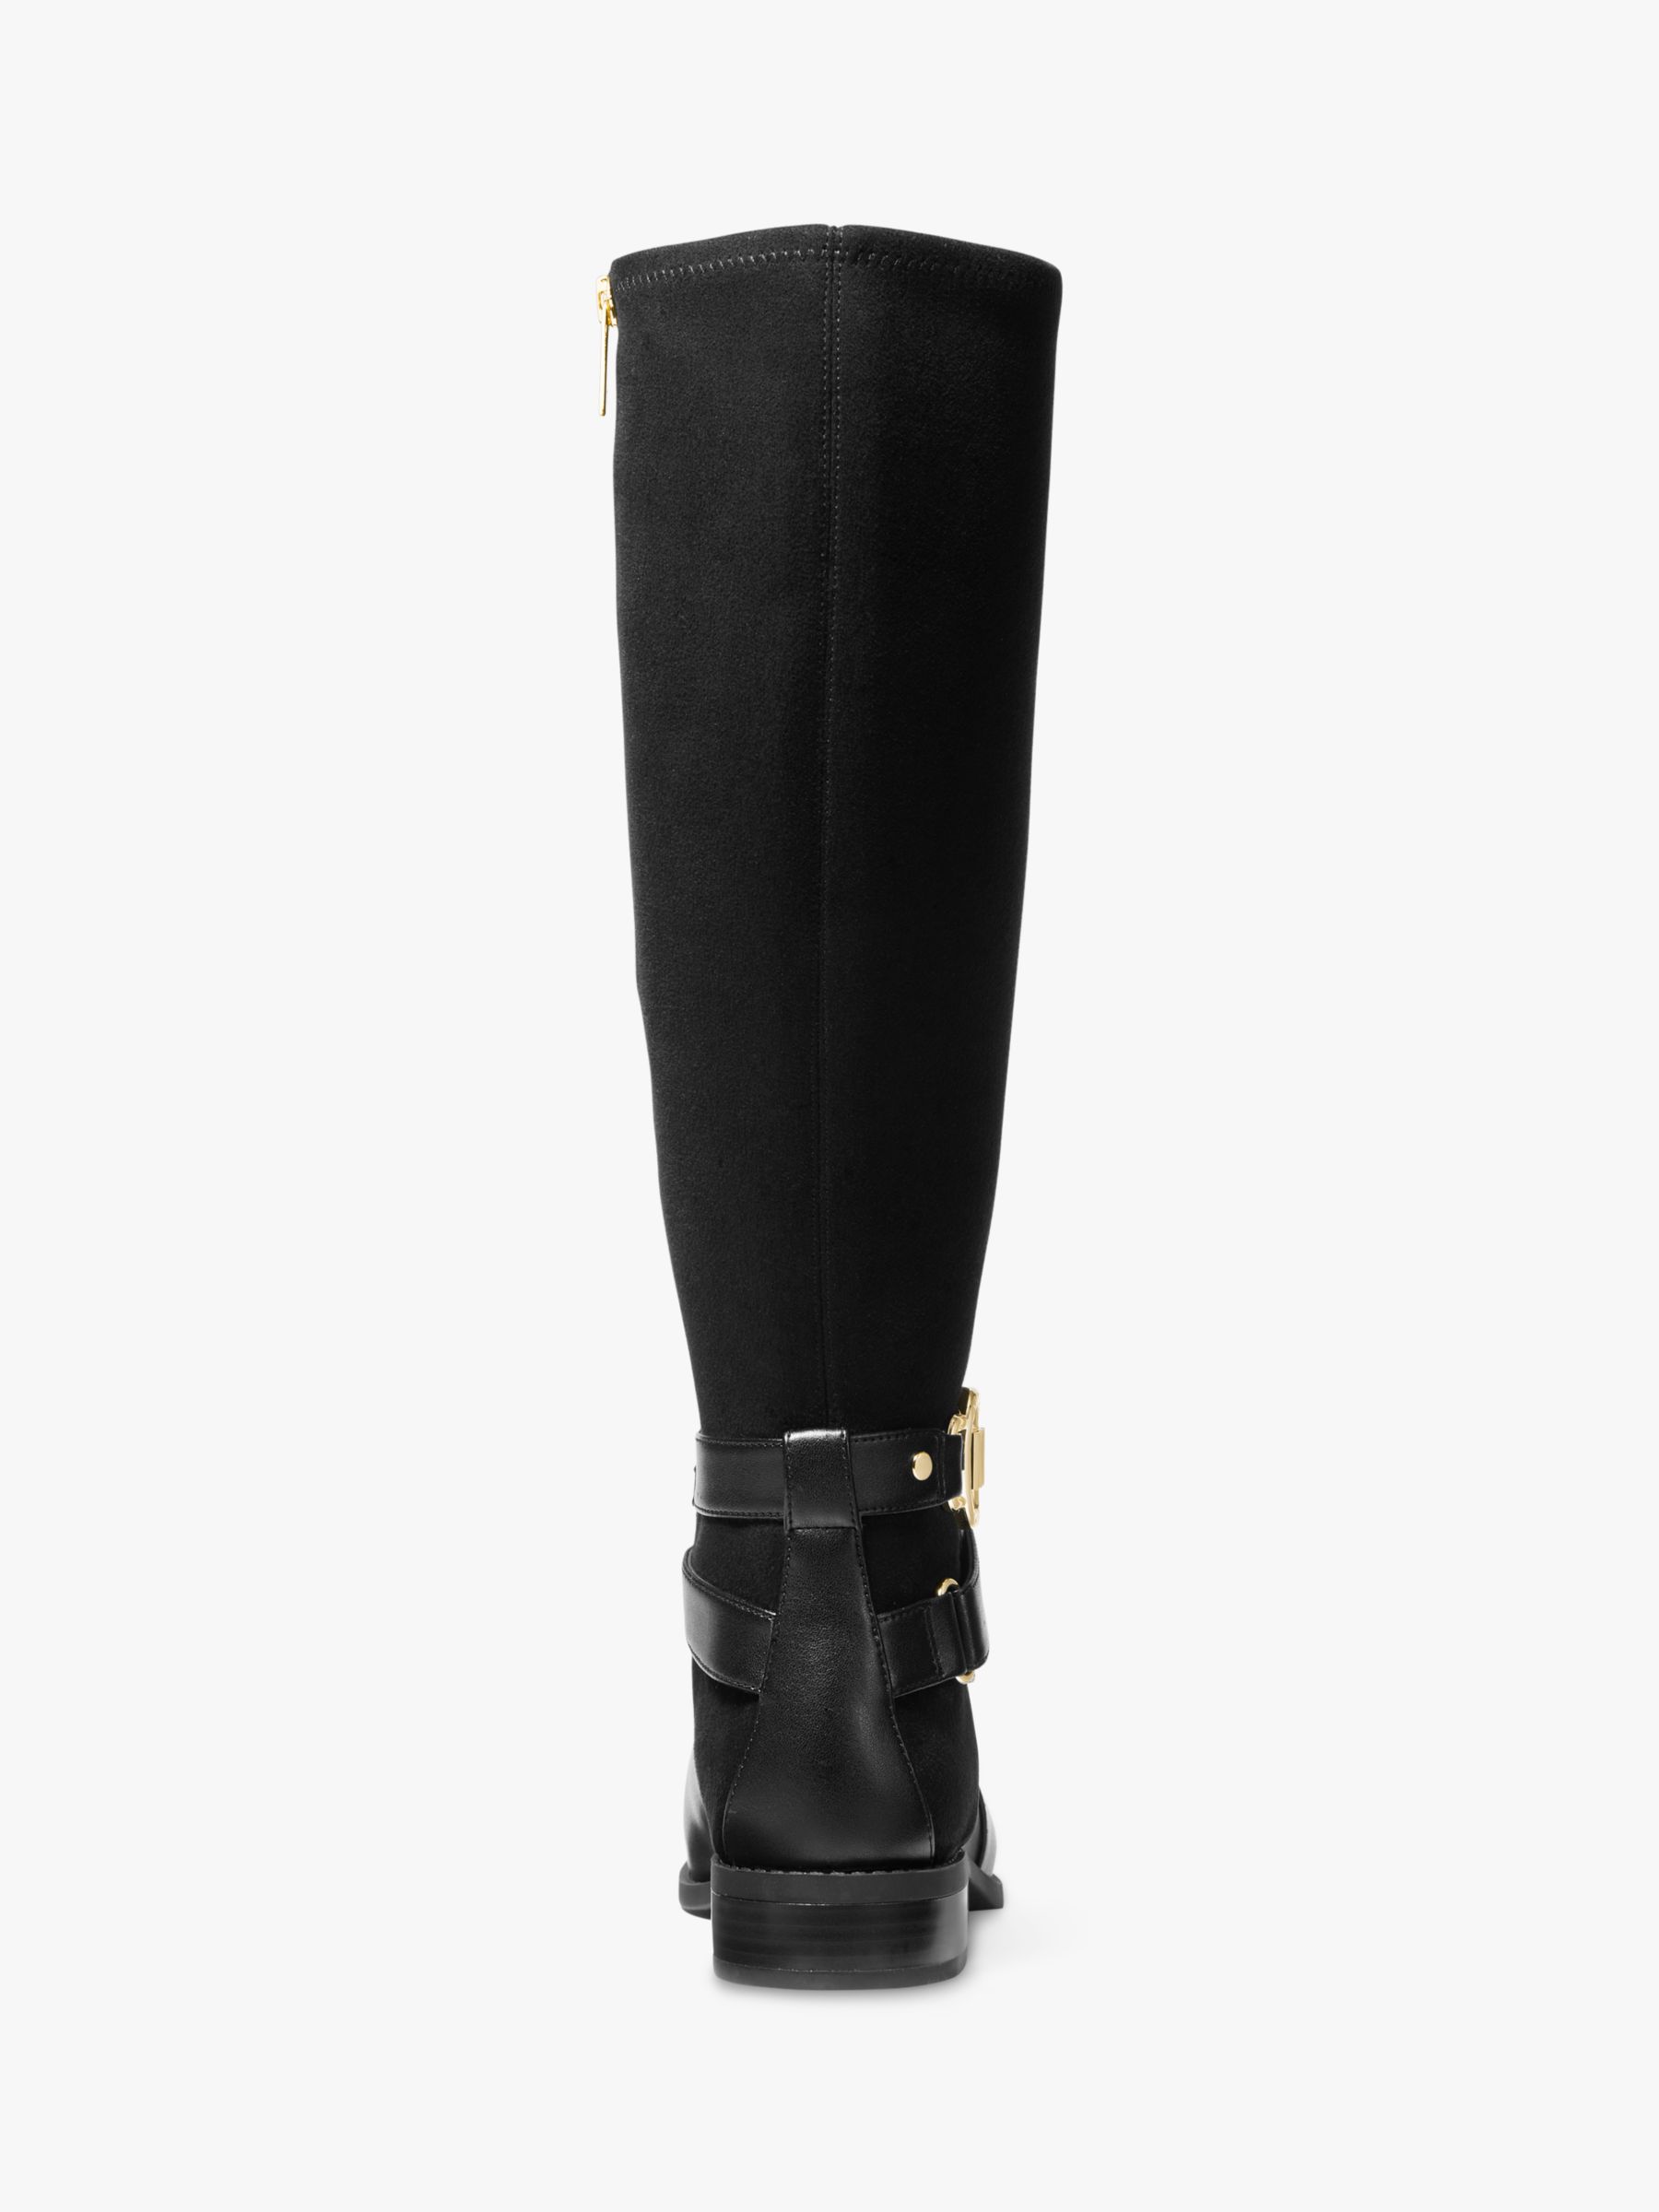 Michael Kors Rory Leather Knee High Boots